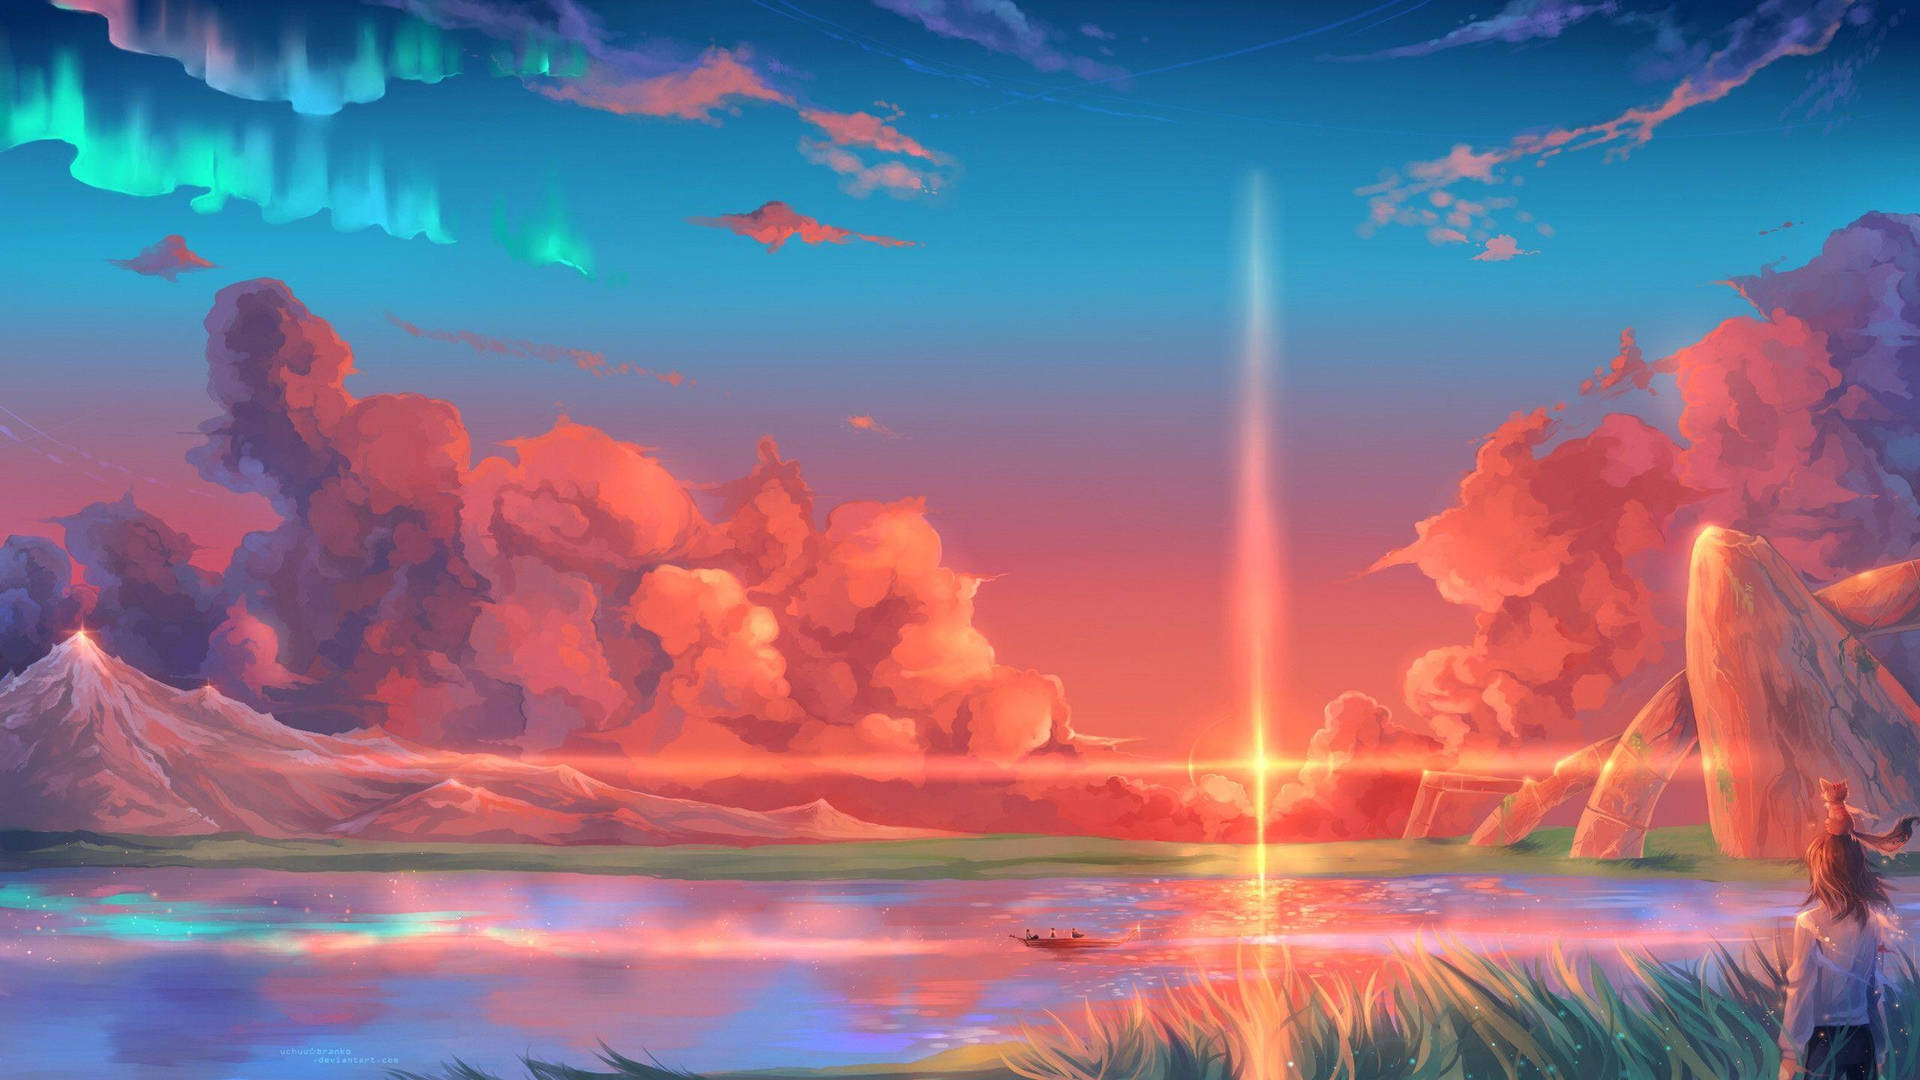 Aesthetic Anime Scenery Of A Sunset